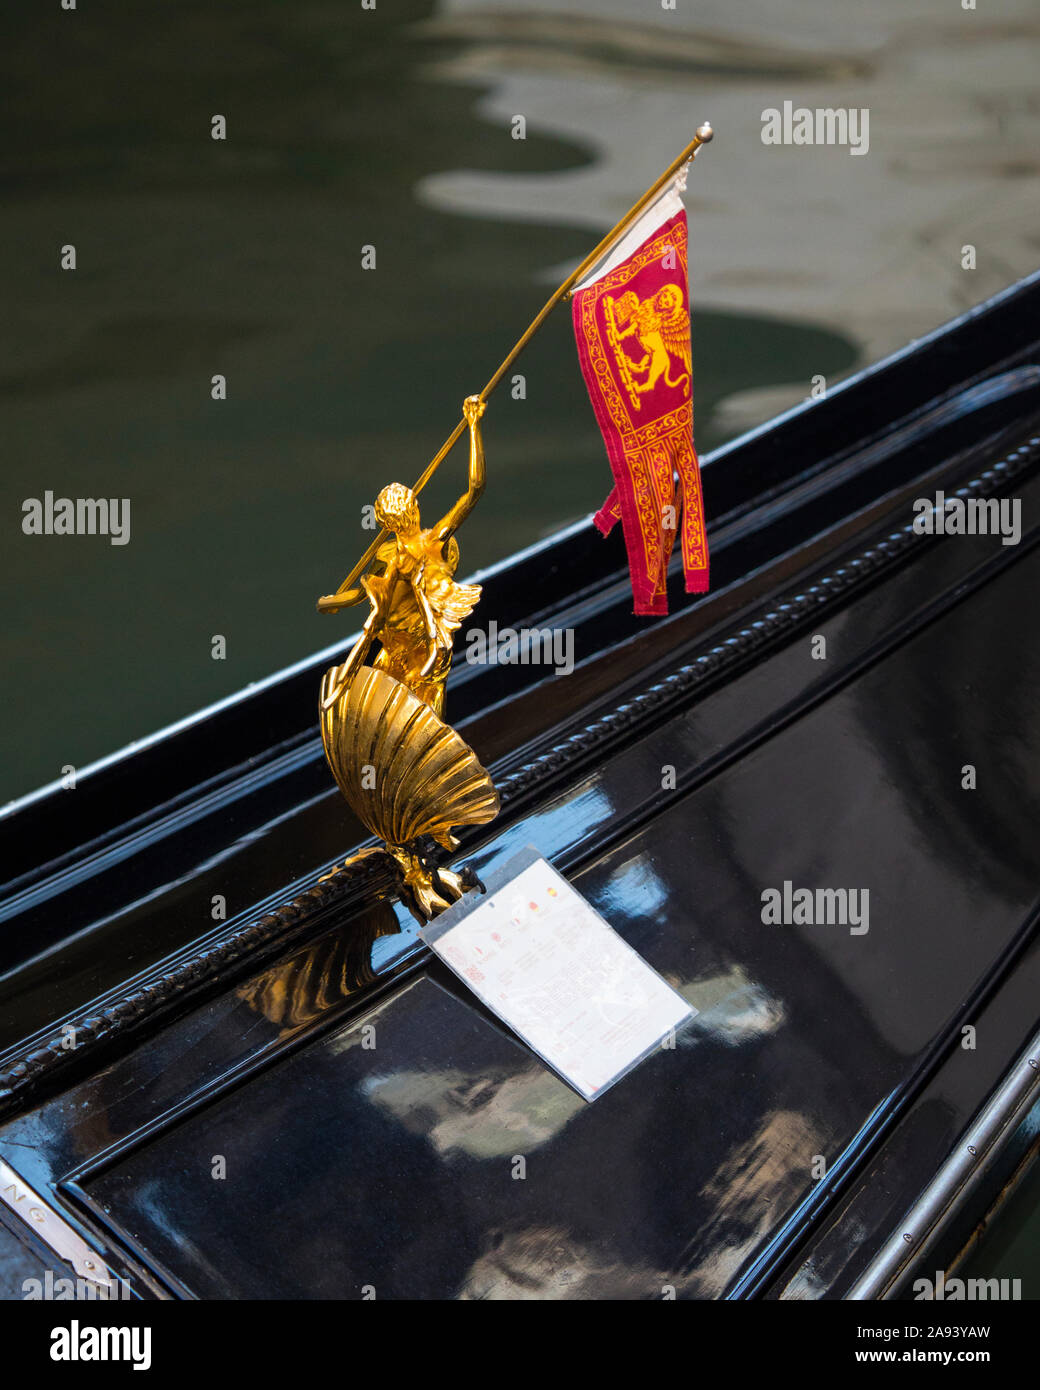 Venice, Italy - July 20th 2019: Close-up detail of a golden sculpture decoration holding the Venetian flag on a Gondola in Venice, Italy. Stock Photo